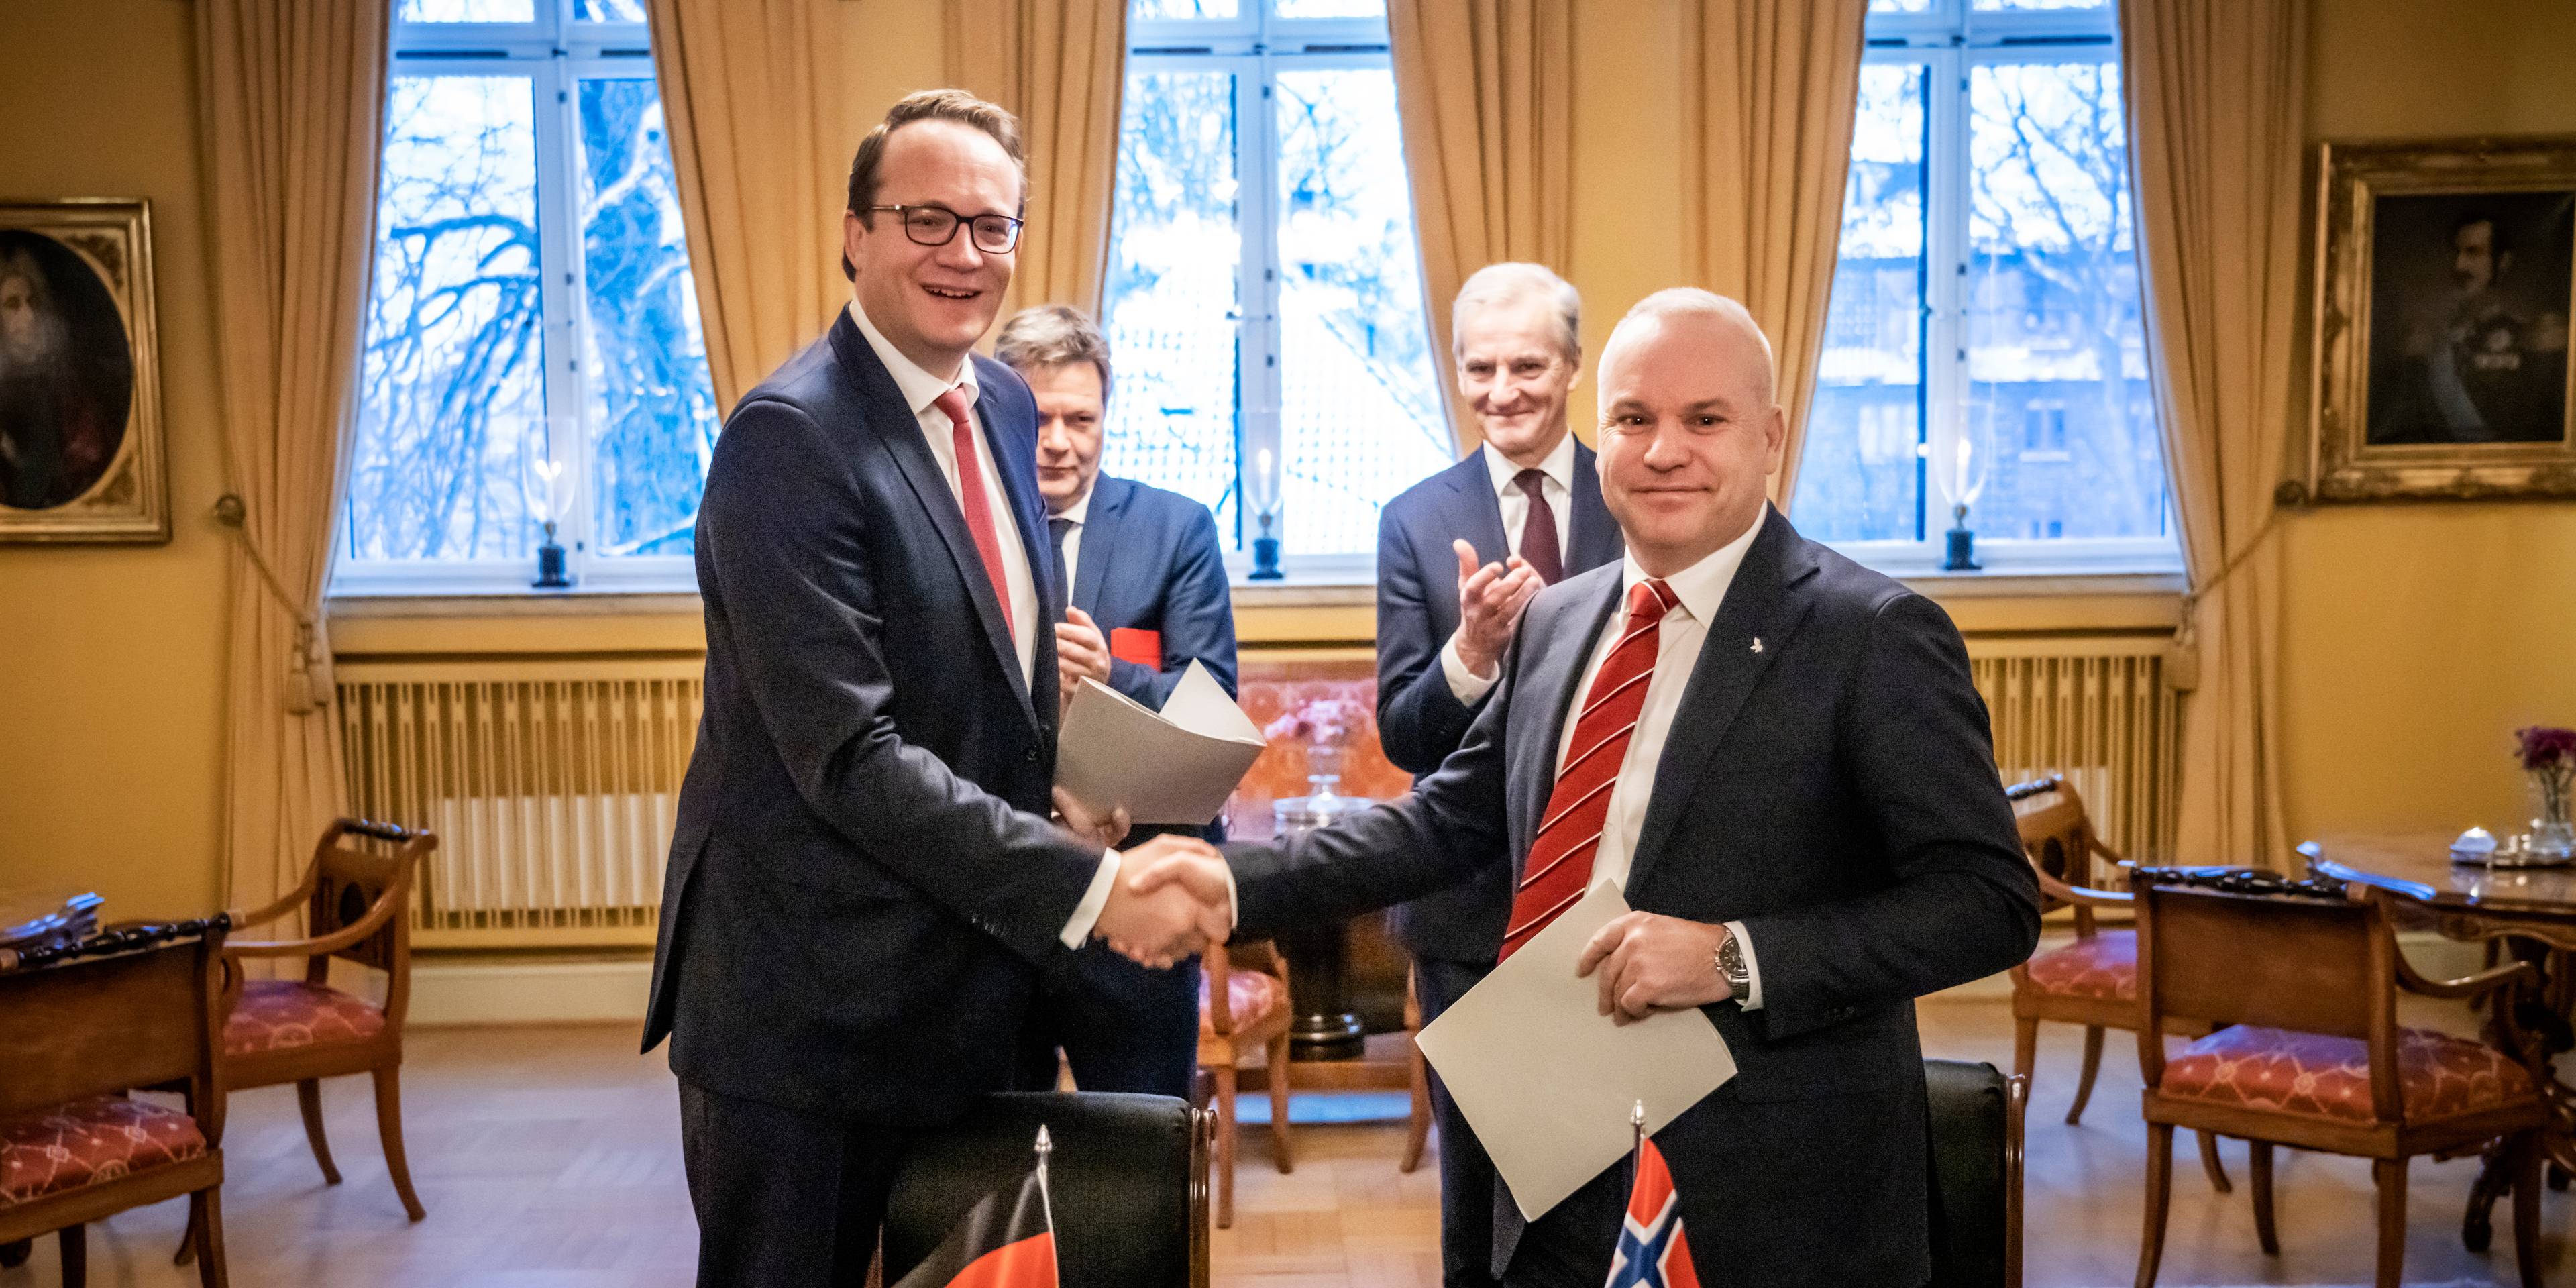 Equinor’s CEO and President Anders Opedal signed the agreement with RWE’s CEO Dr. Markus Krebber in Oslo on 5 January 2023, in the presence of Prime Minister Jonas Gahr Støre and Germany’s Vice Chancellor Robert Habeck. 